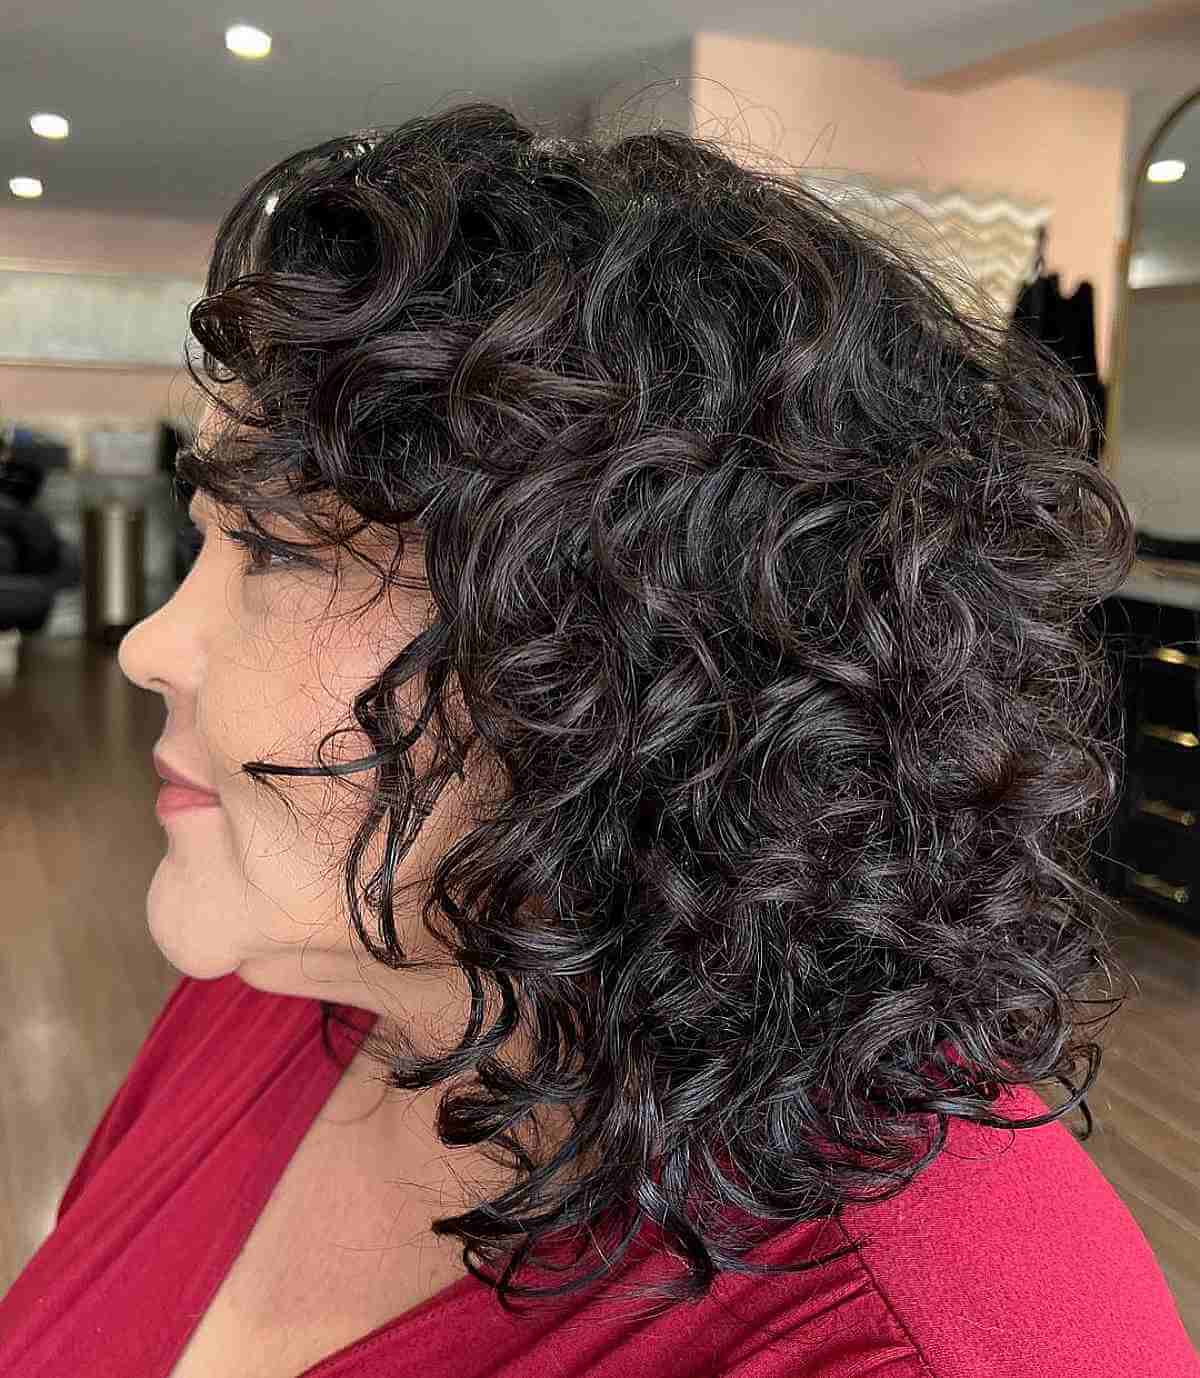 Shoulder-Length Curly Haircut with Curly Bangs for an Old Lady